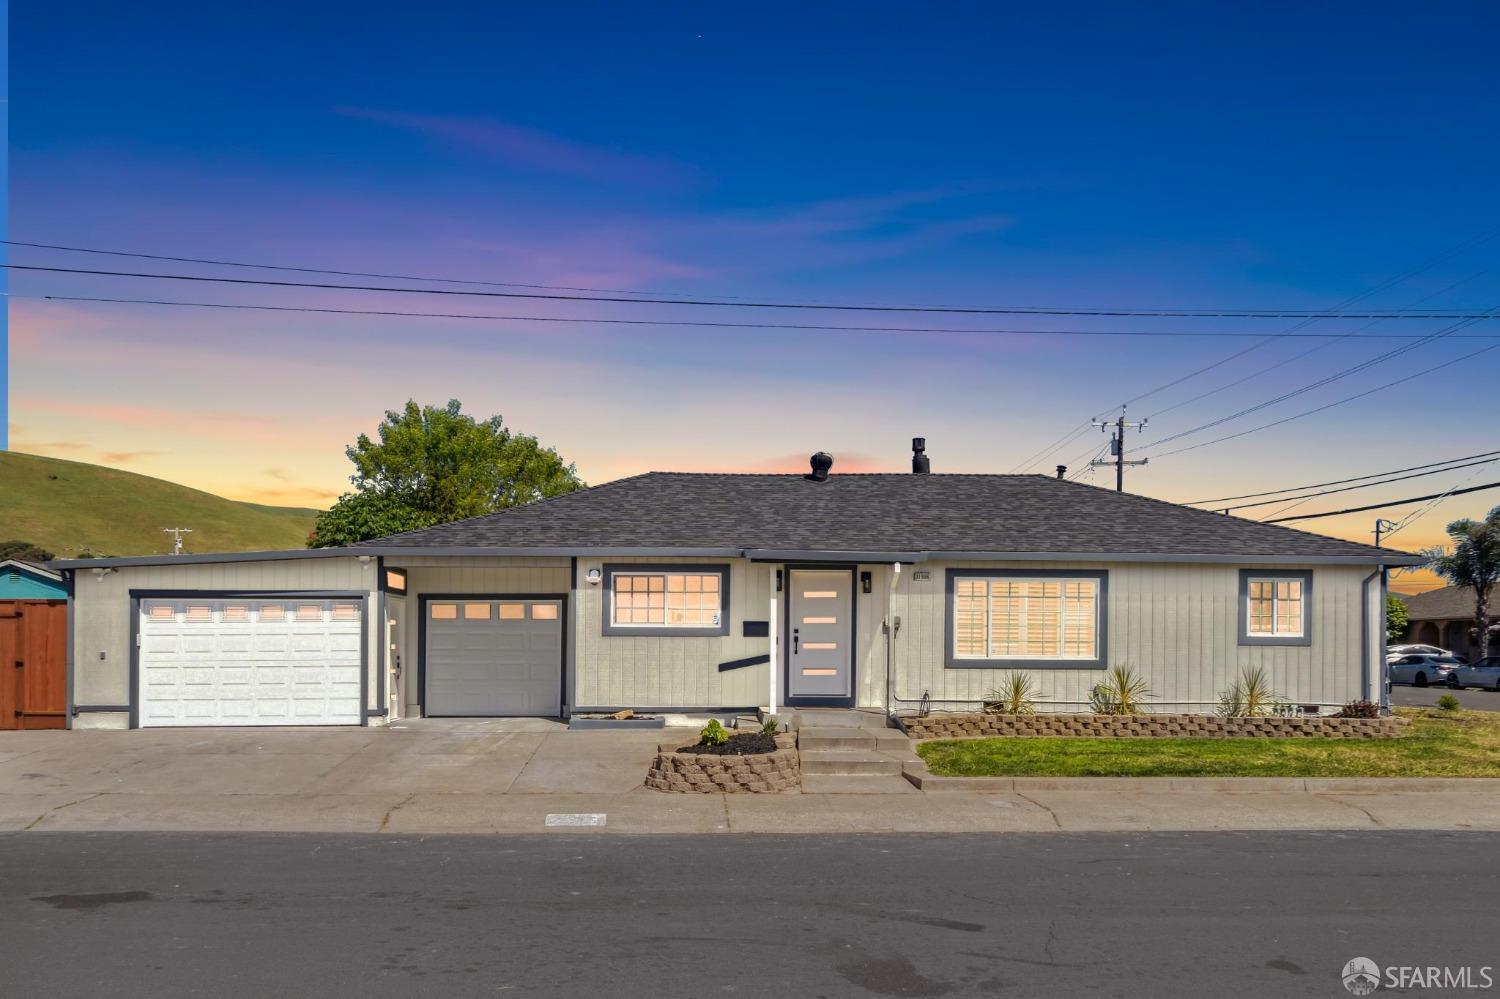 Photo of 31996 Kennet St in Hayward, CA